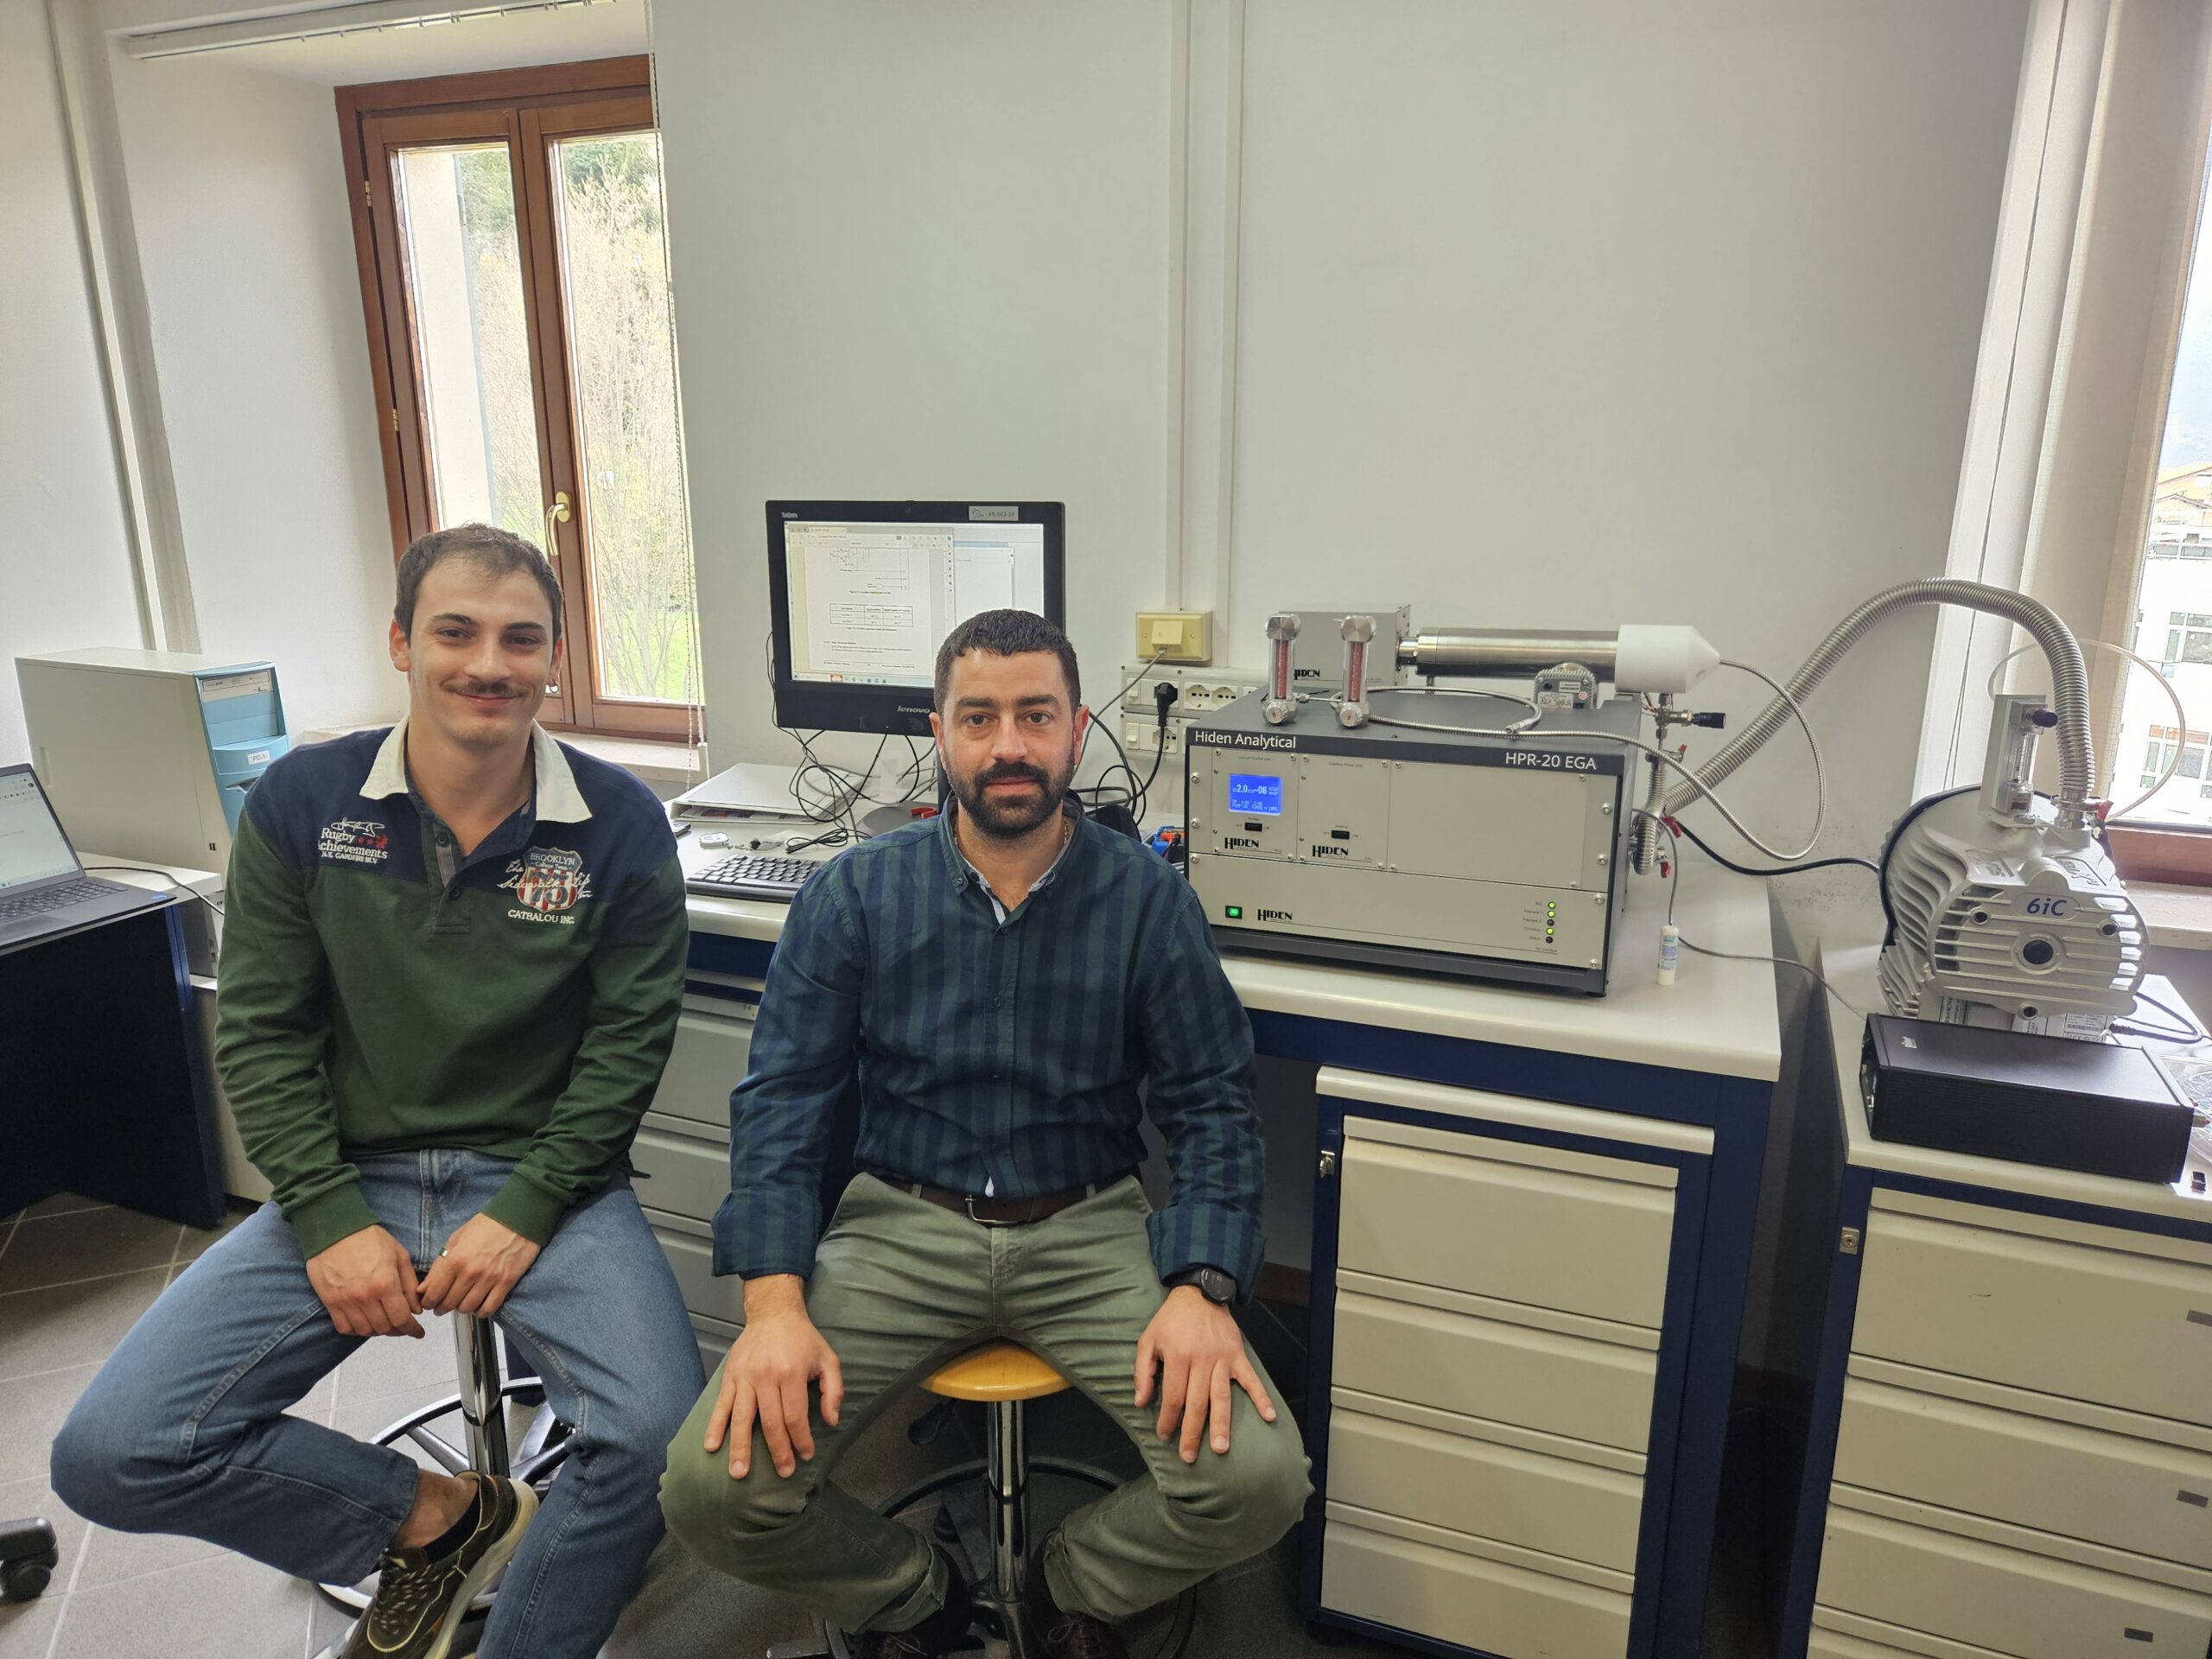 Lucio Dal Sorbo of Kairospace and Paolo Cognigni, a distinguished researcher in the field